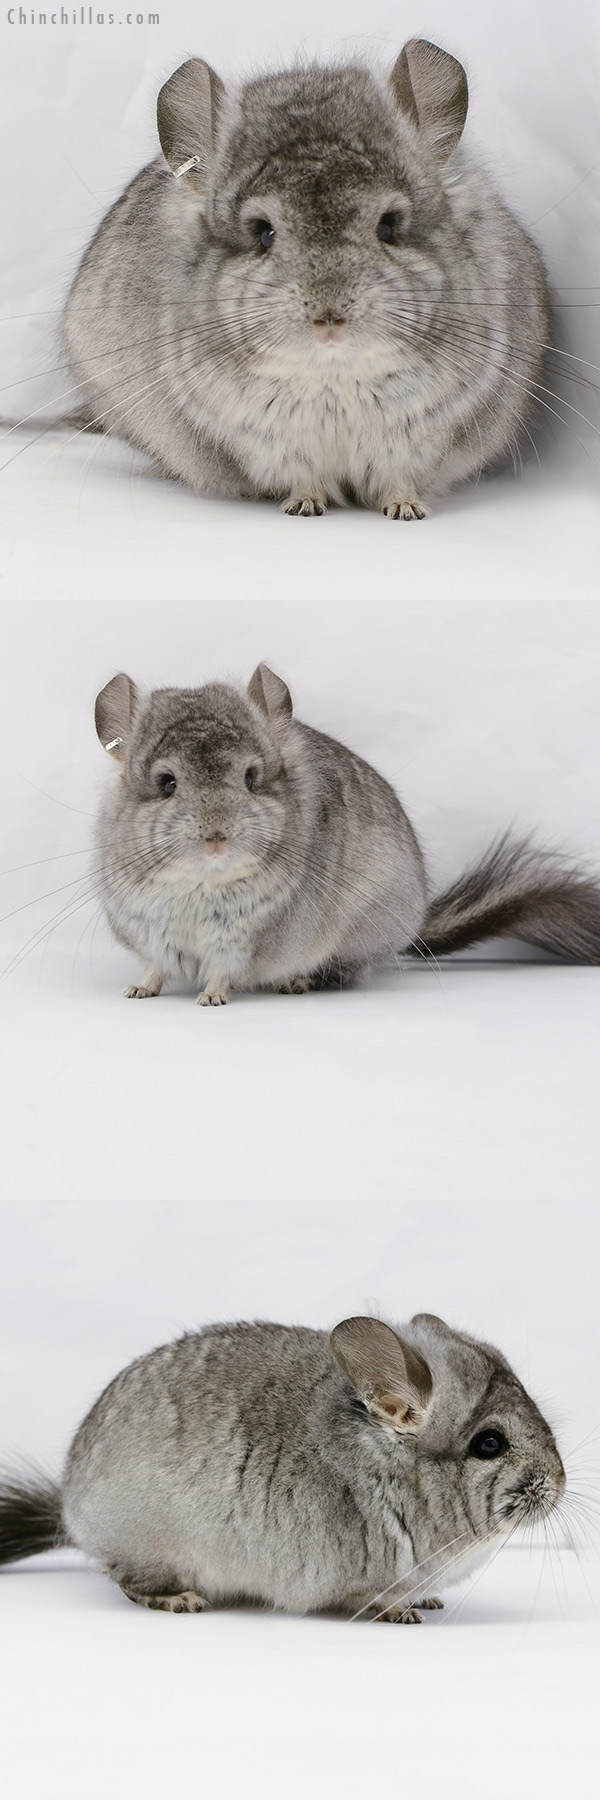 Chinchilla or related item offered for sale or export on Chinchillas.com - 20175 Standard ( Violet Carrier )  Royal Persian Angora Male Chinchilla